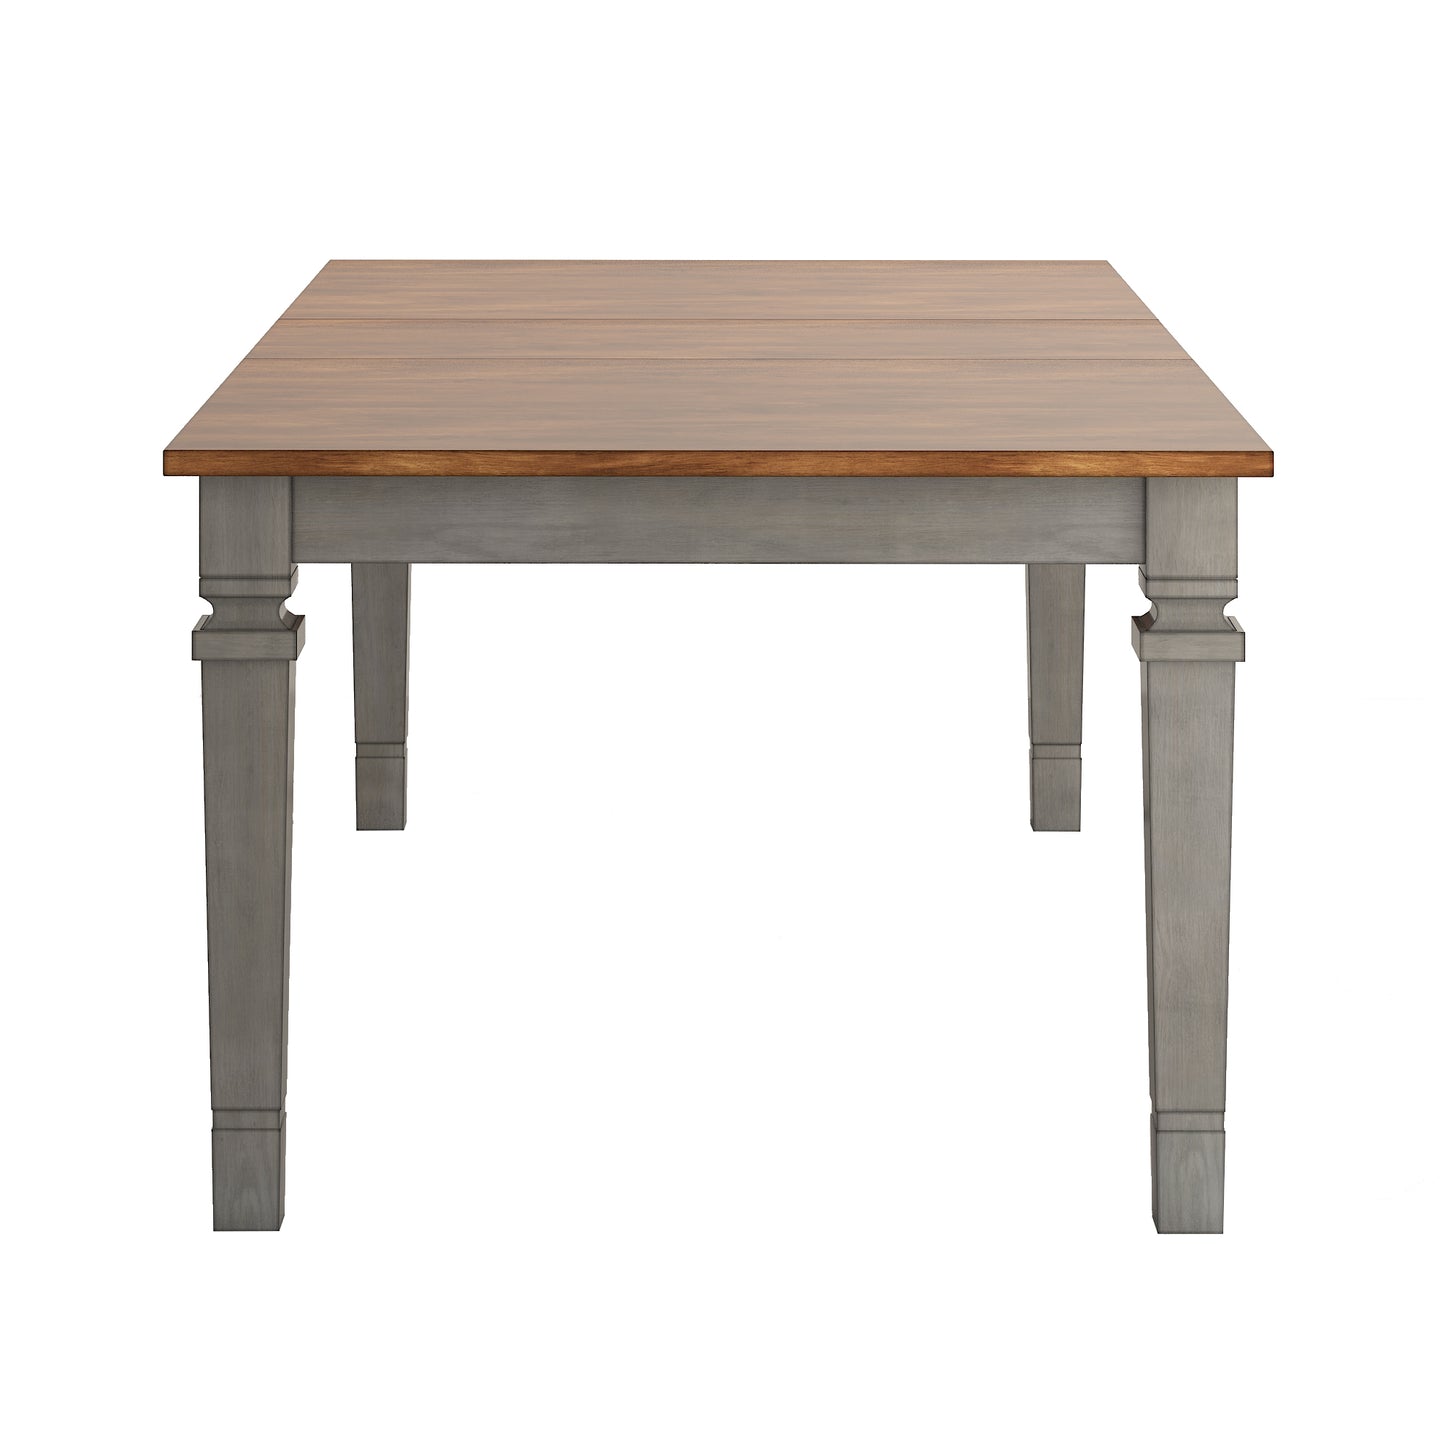 Solid Wood 64-82" Extendable Dining Table - Antique Grey